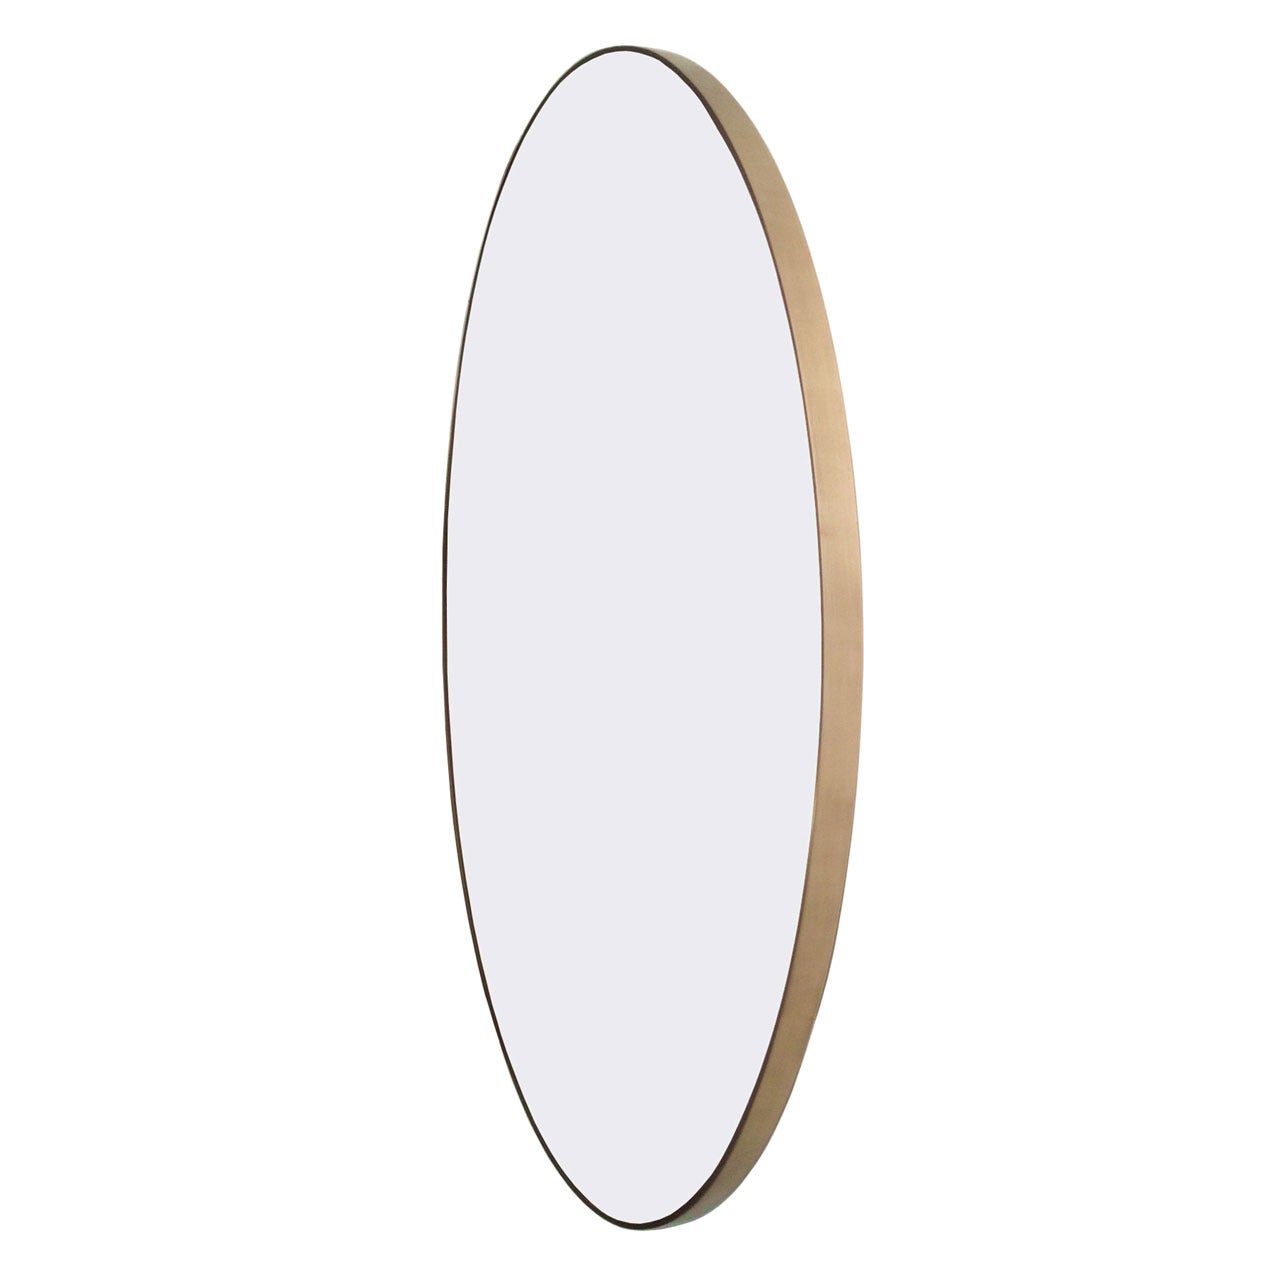 "Miror, Mirror" Solid Brass Wall Mirror, Limited Edition of 11